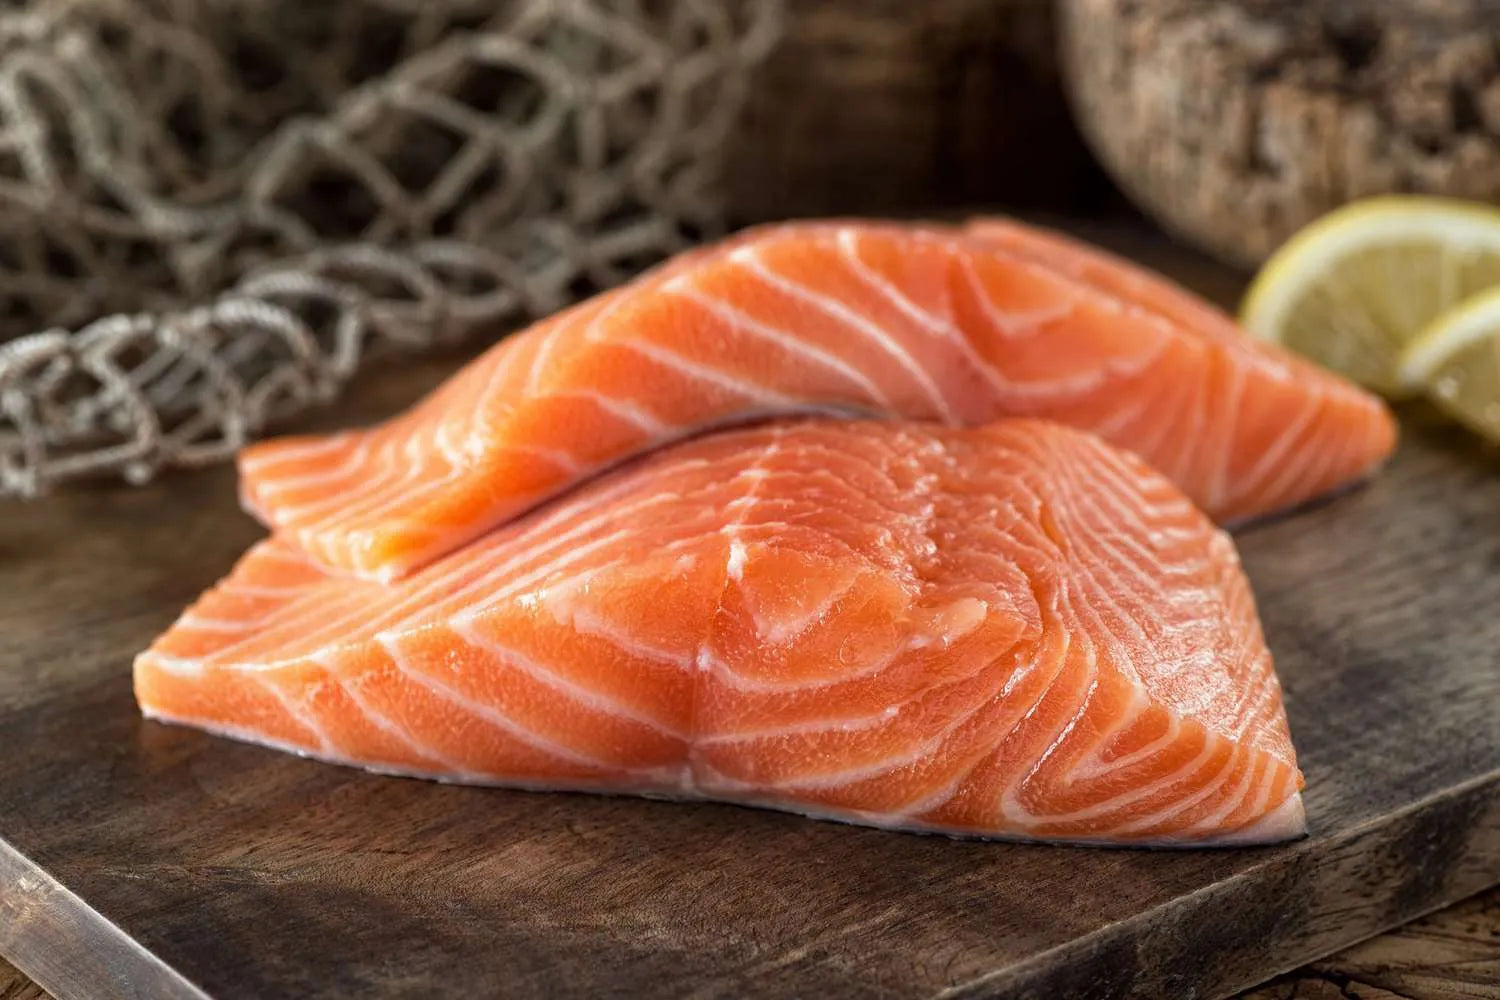 Fresh salmon fillet maintaining natural flavors and nutrients